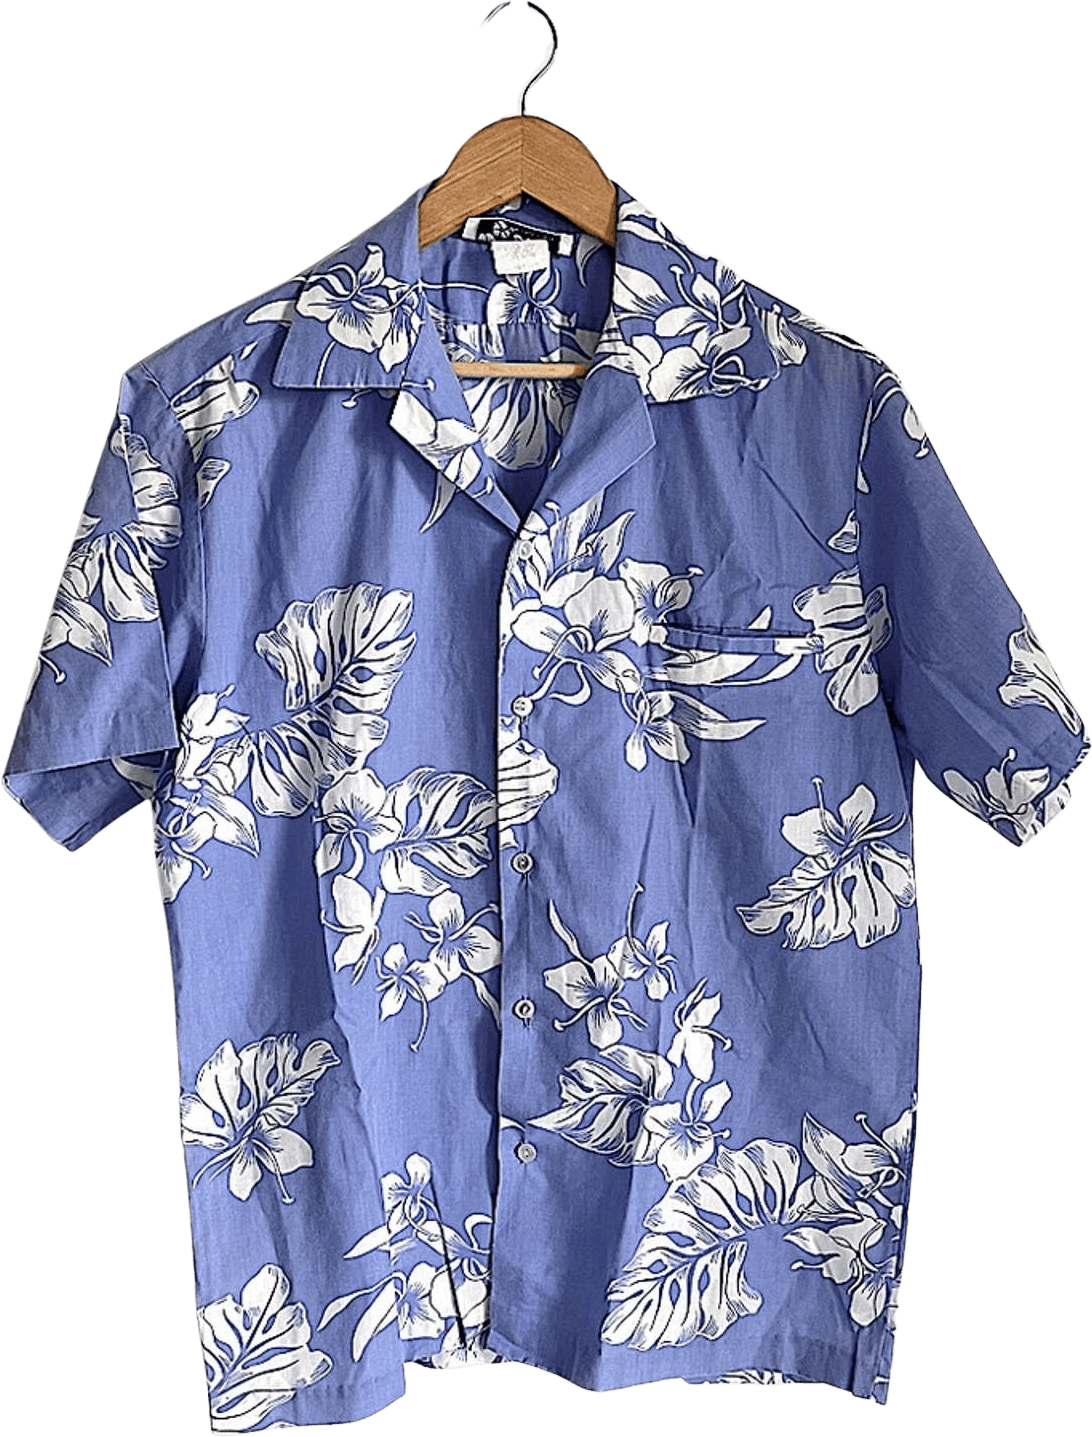 Vintage Blue and White Floral Print Cotton Button Up Shirt by Hilo ...